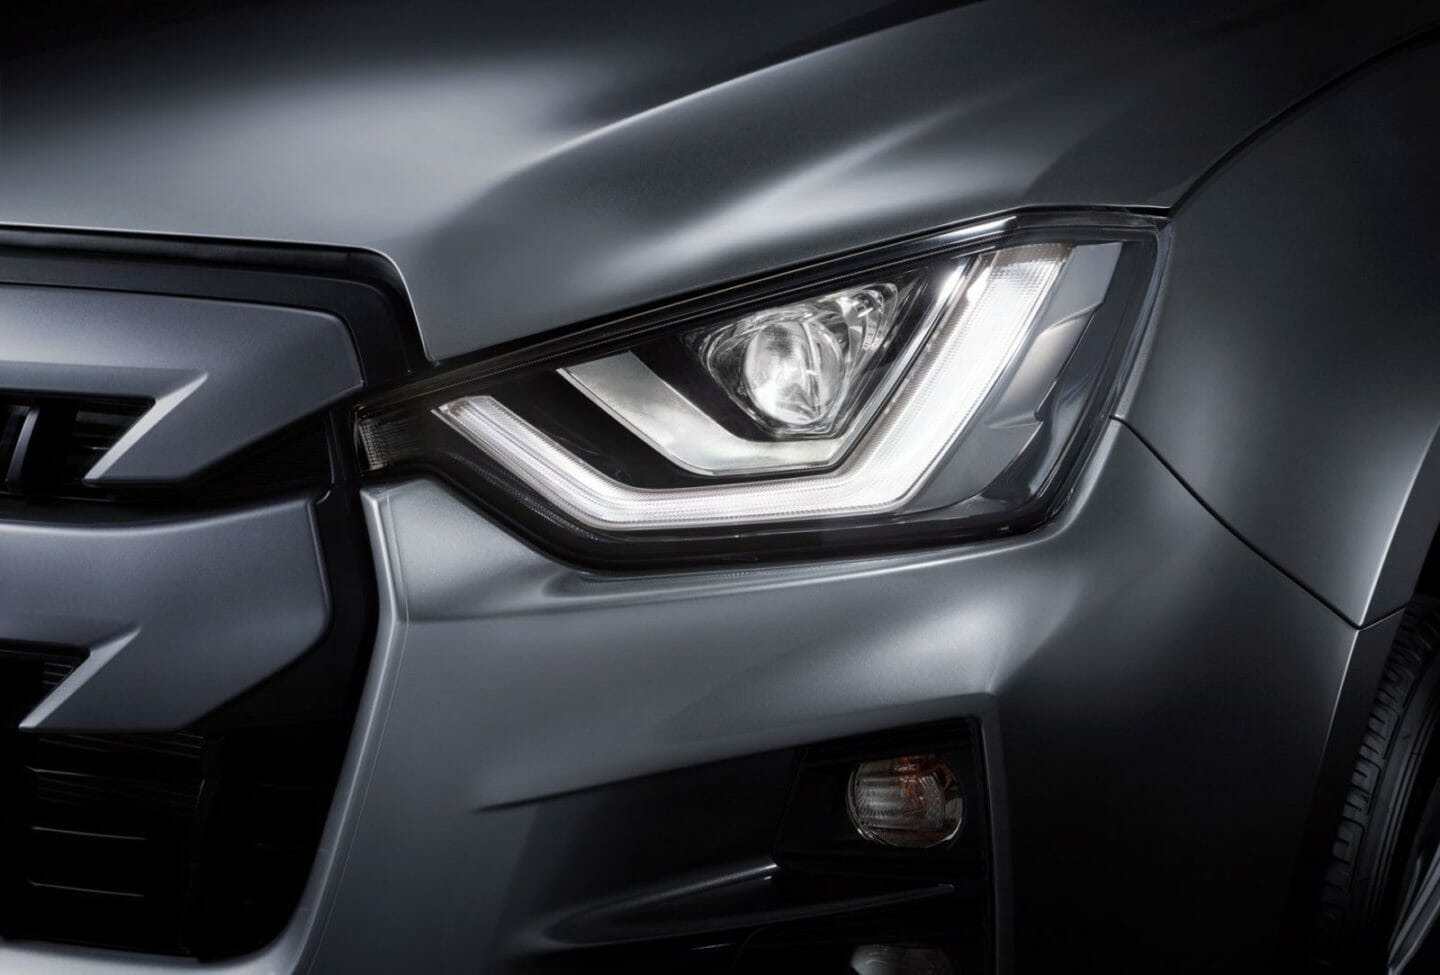 Bi-LED Projector Headlamps with LED DRL